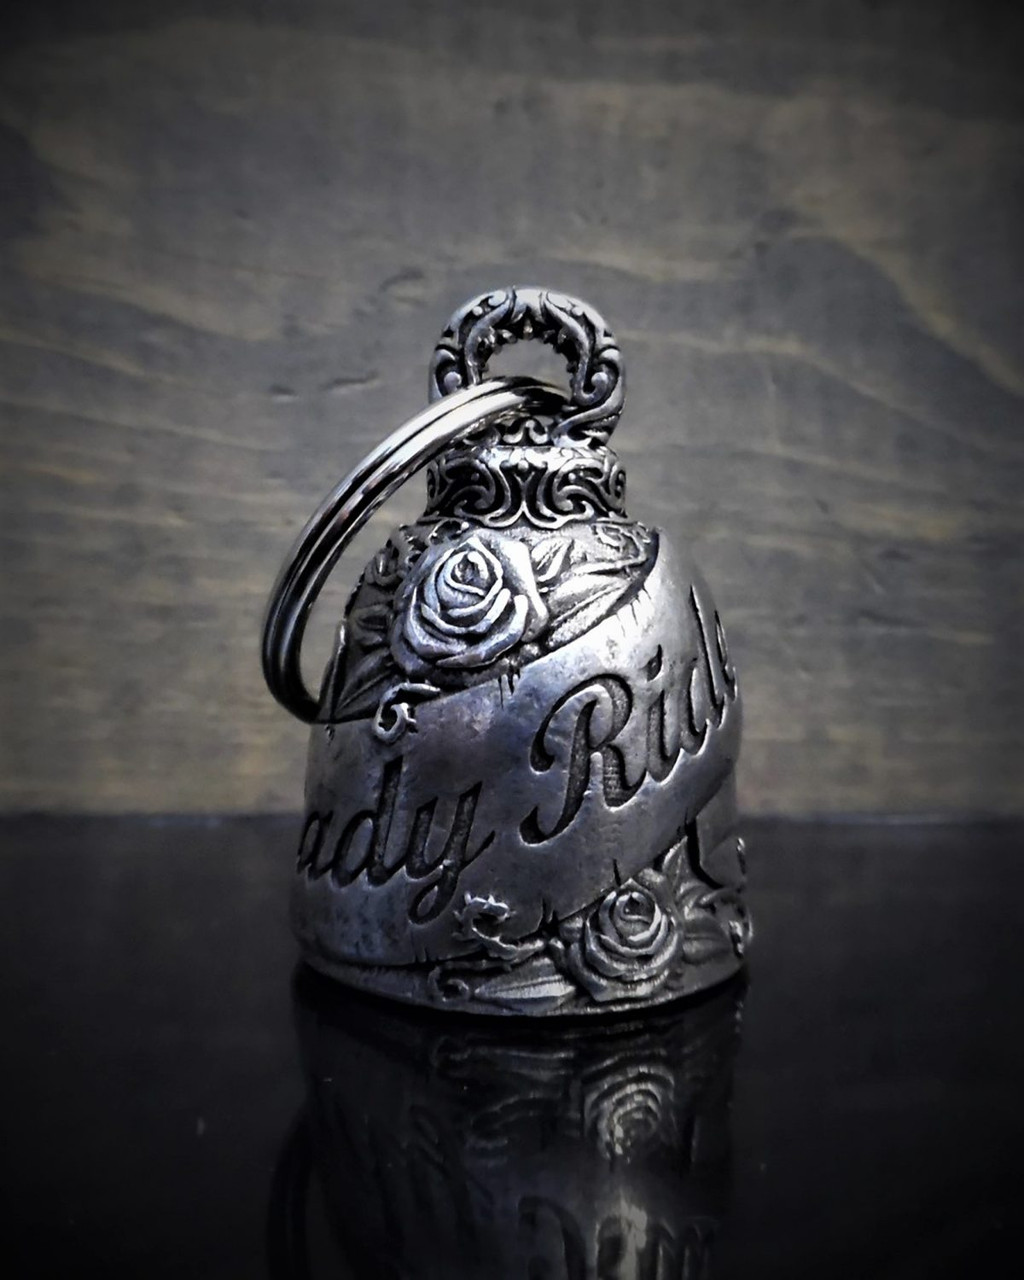 Guardian Bell, Lady Rider Sketched into this Biker Bell